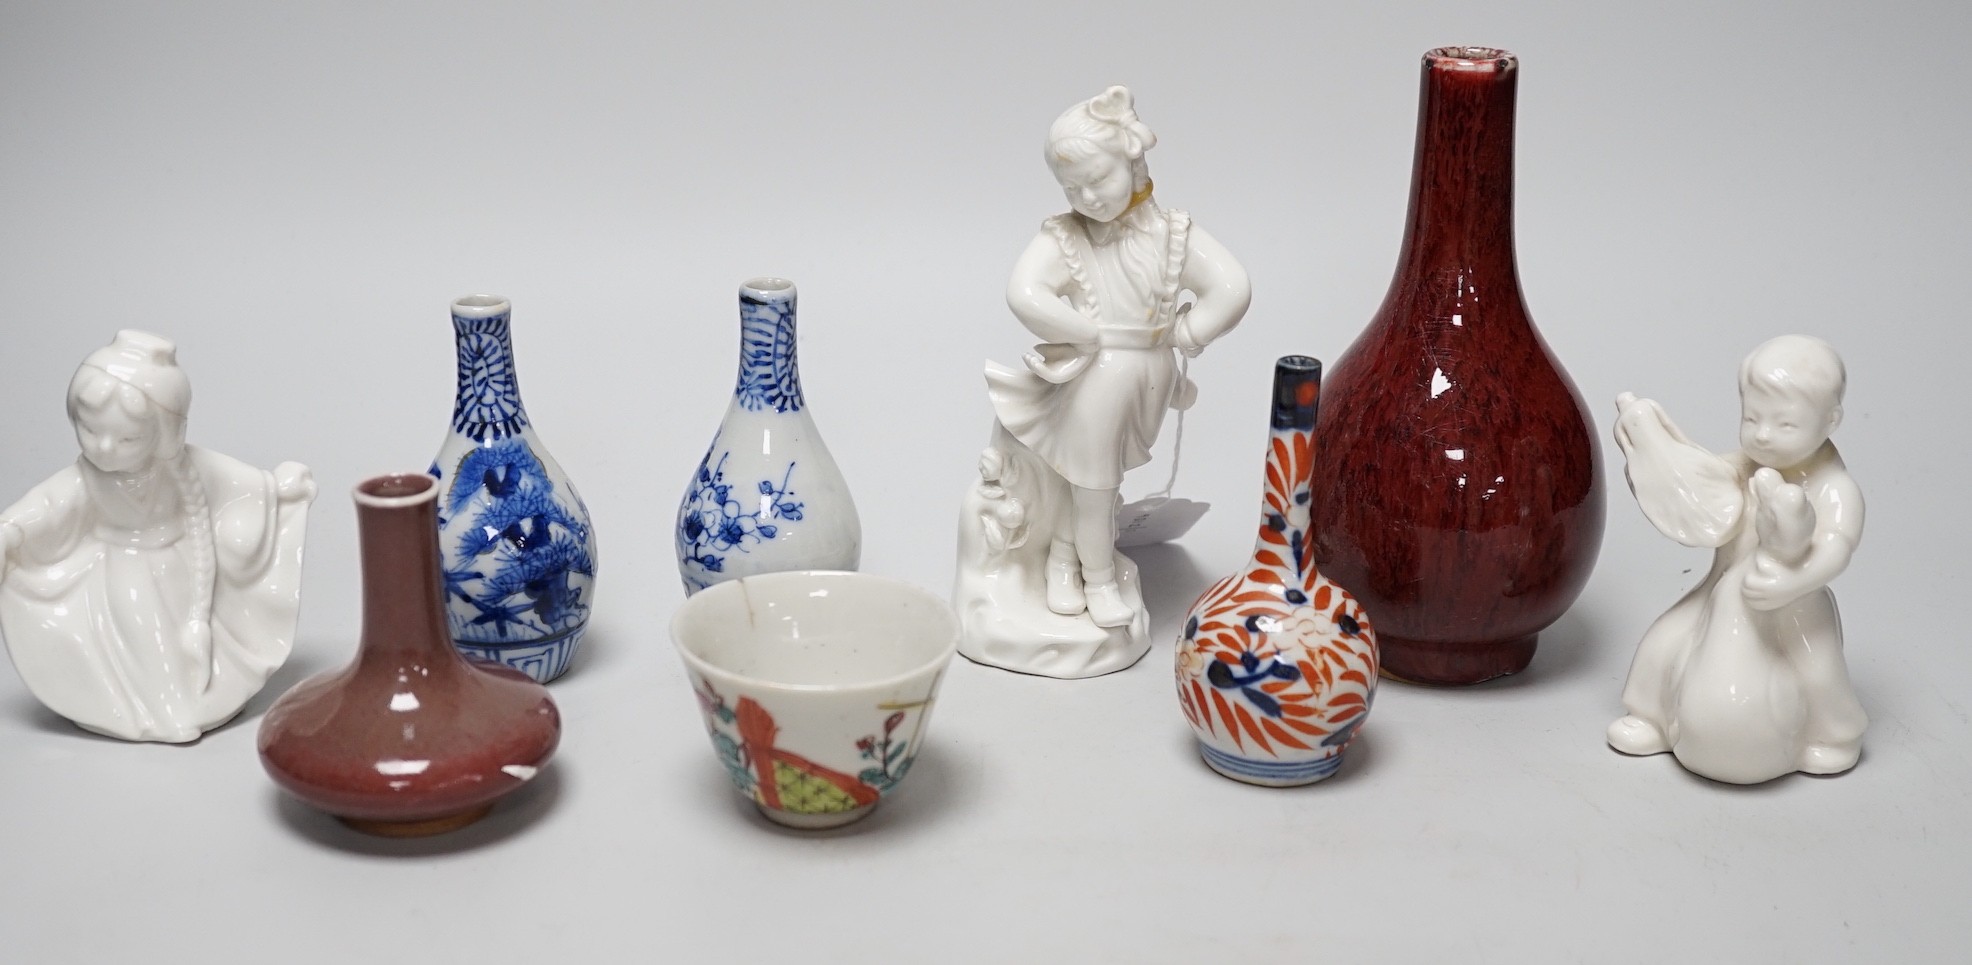 A Chinese sang de boeuf bottle neck vase, together with four Chinese miniature vases, three